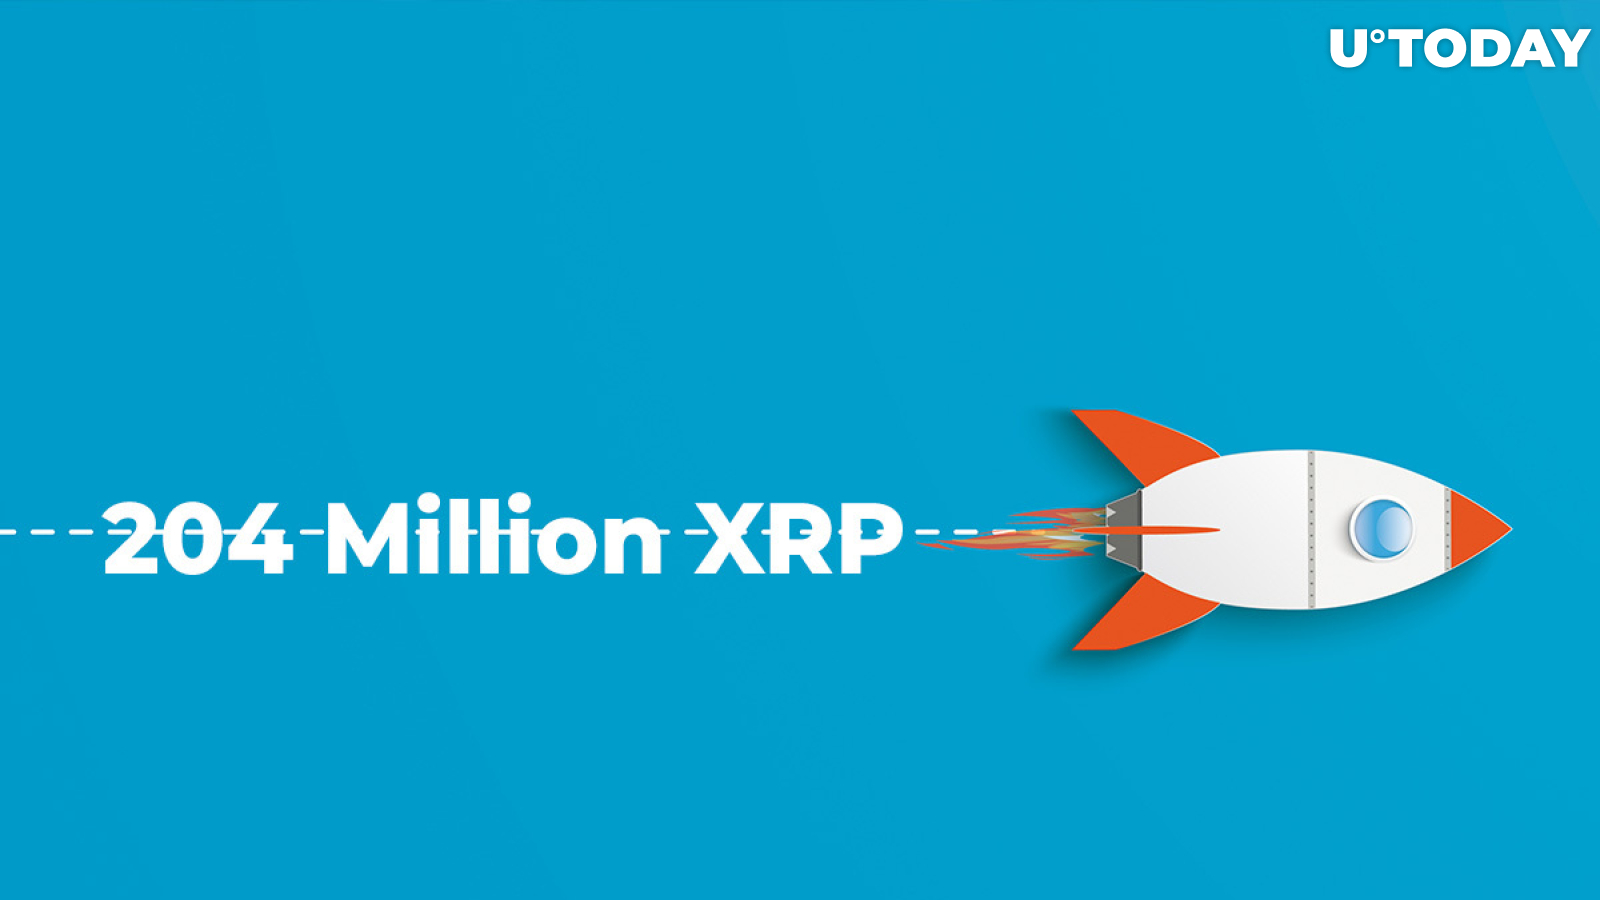 Ripple shifts 204 Million XRP Along with Rippleworks and Binance